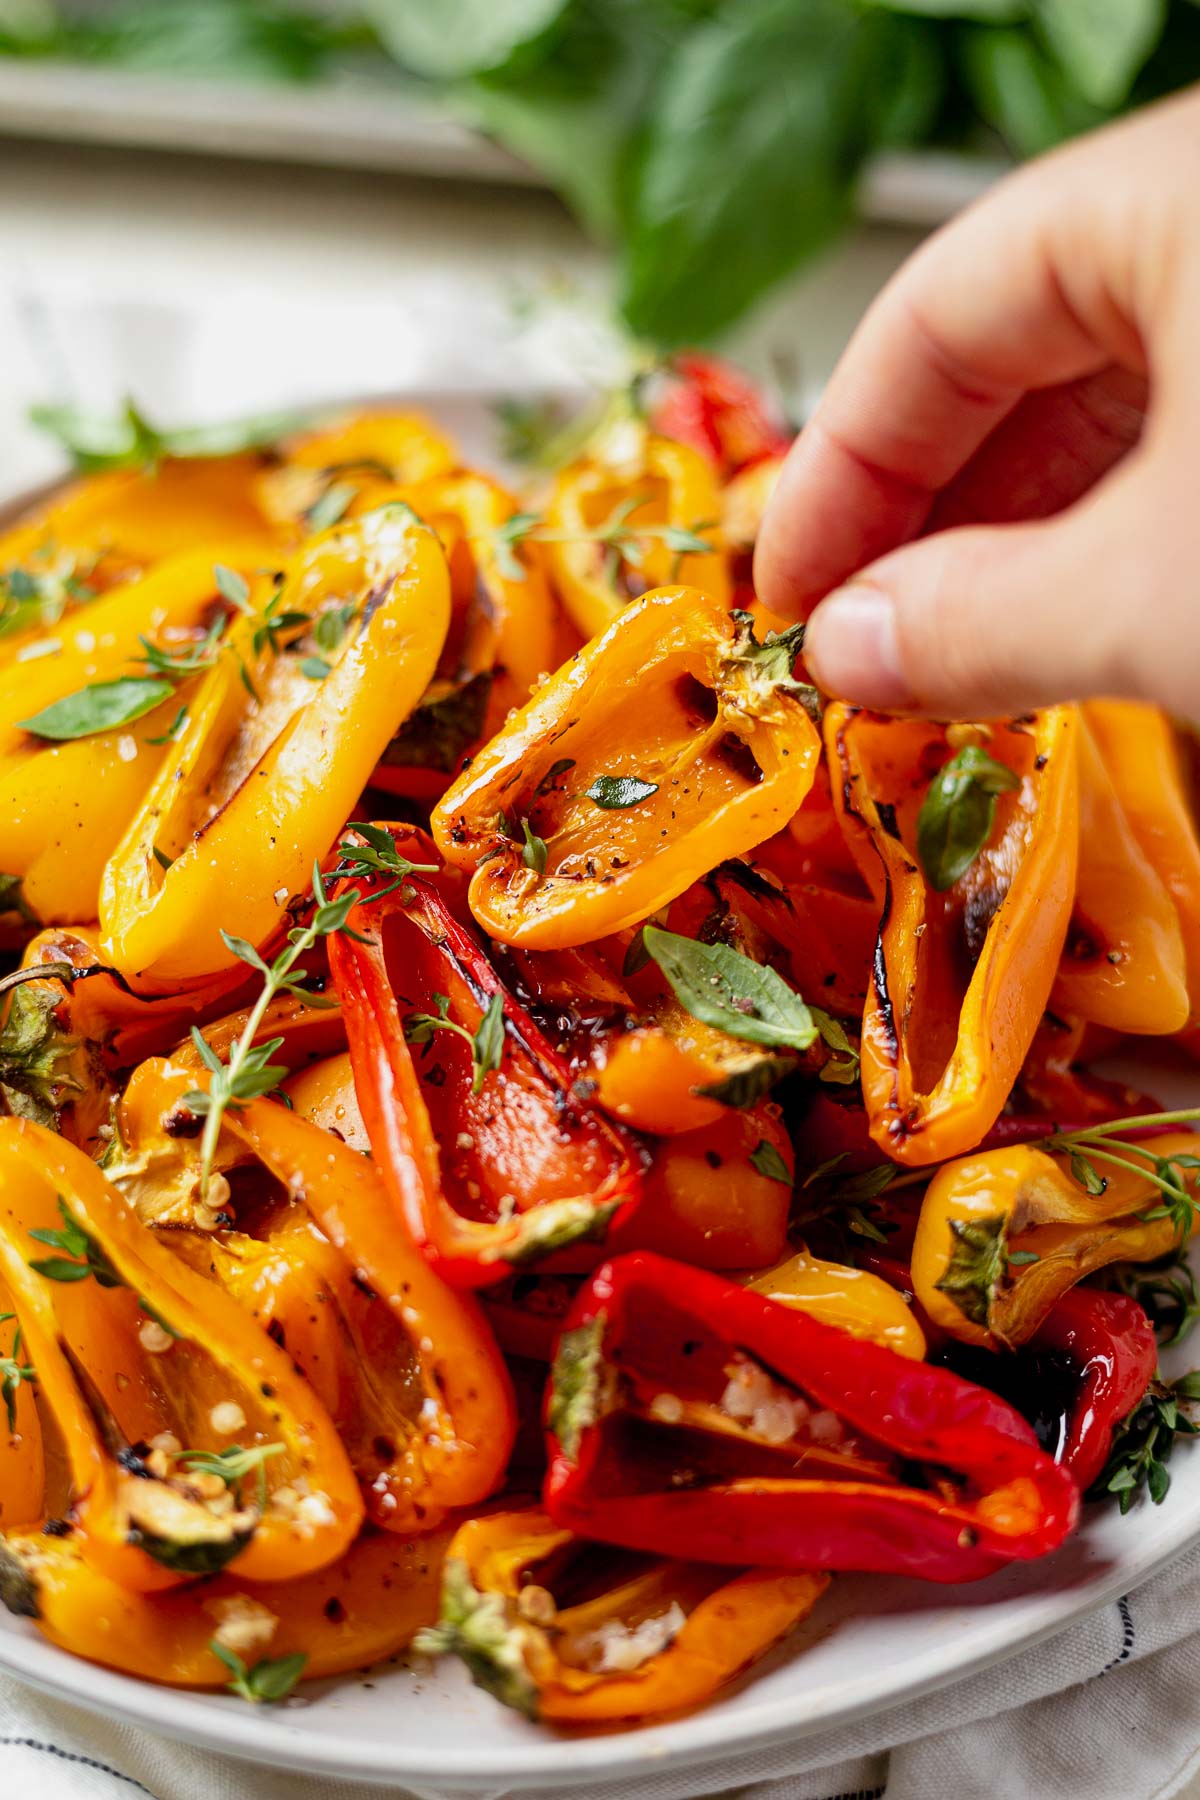 a plate of roasted mini sweet peppers with a woman's hand picking up a yellow pepper off the top